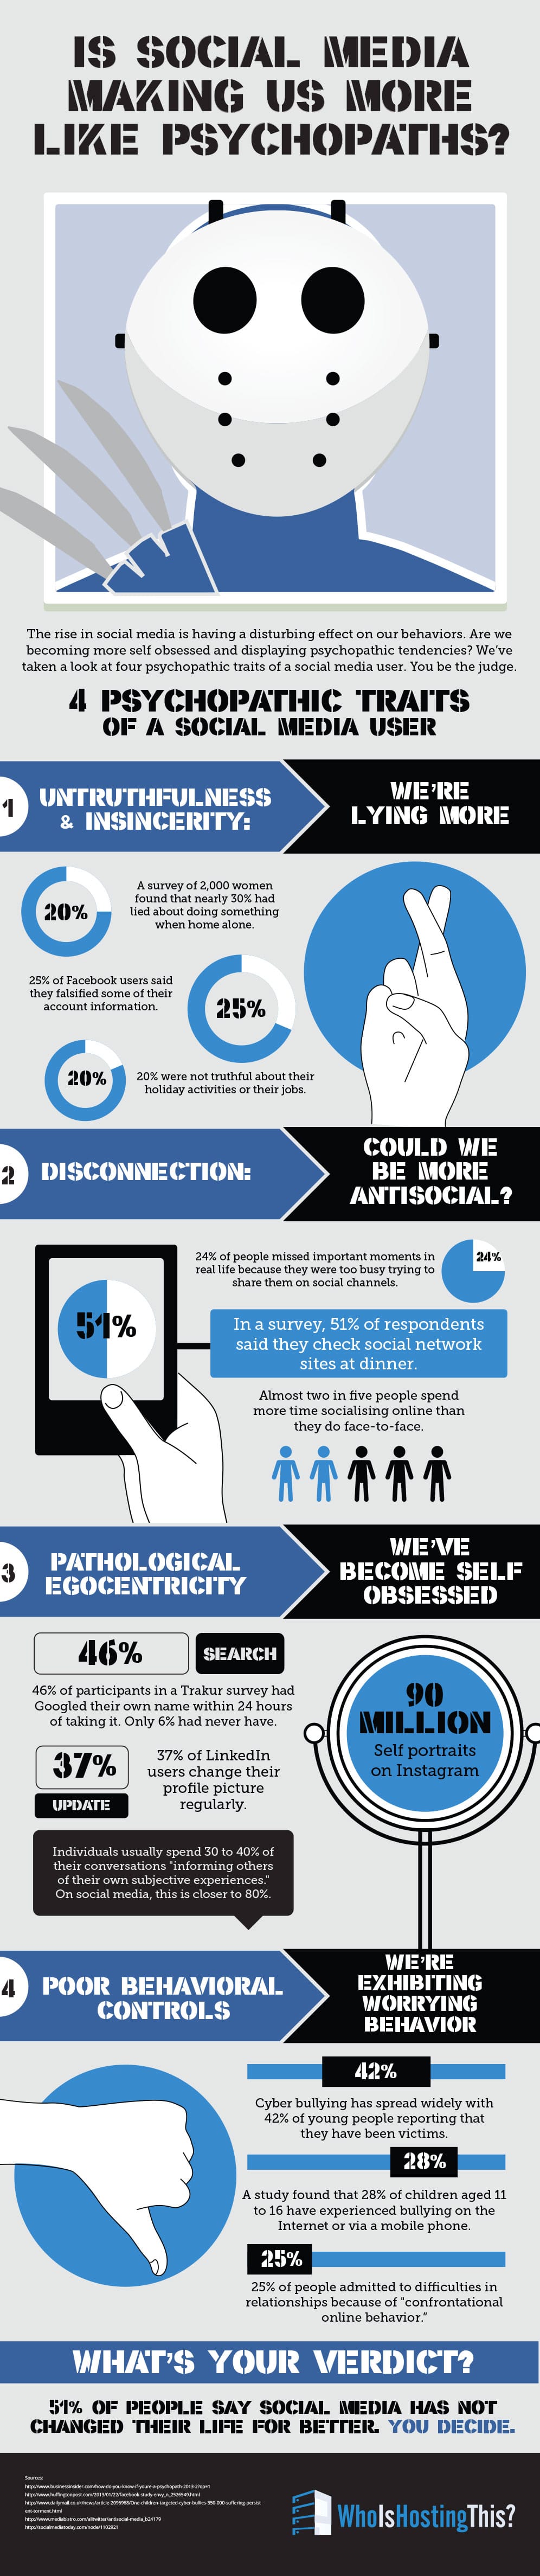 How Social Media Addicts Are Similar To Psychopaths [Infographic]